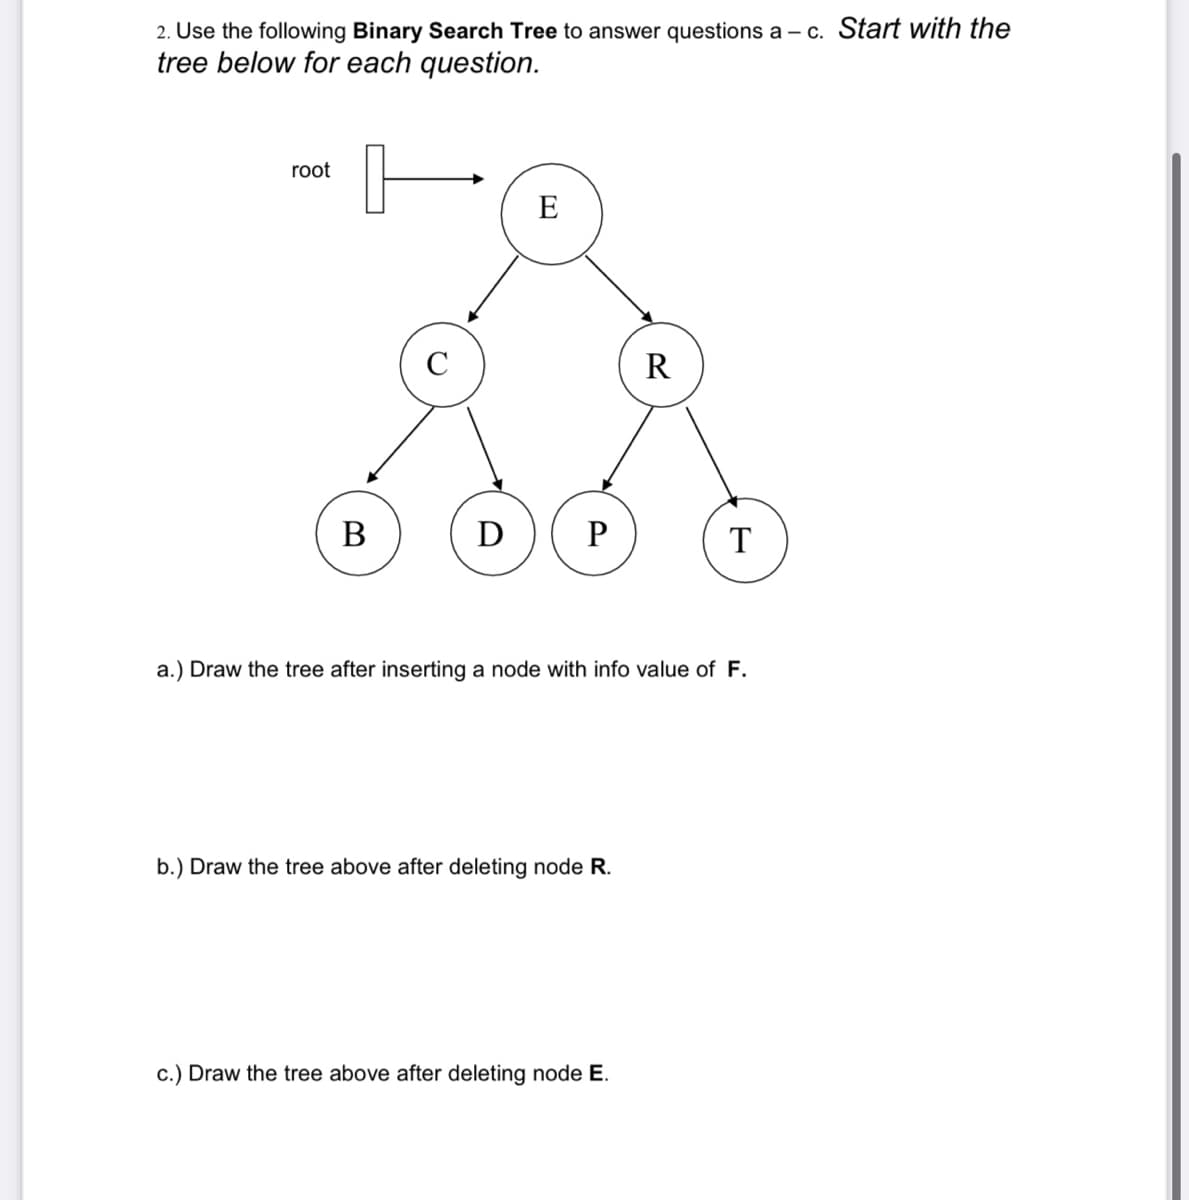 2. Use the following Binary Search Tree to answer questions a – c. Start with the
tree below for each question.
root
E
C
R
D
P
T
a.) Draw the tree after inserting a node with info value of F.
b.) Draw the tree above after deleting node R.
c.) Draw the tree above after deleting node E.
